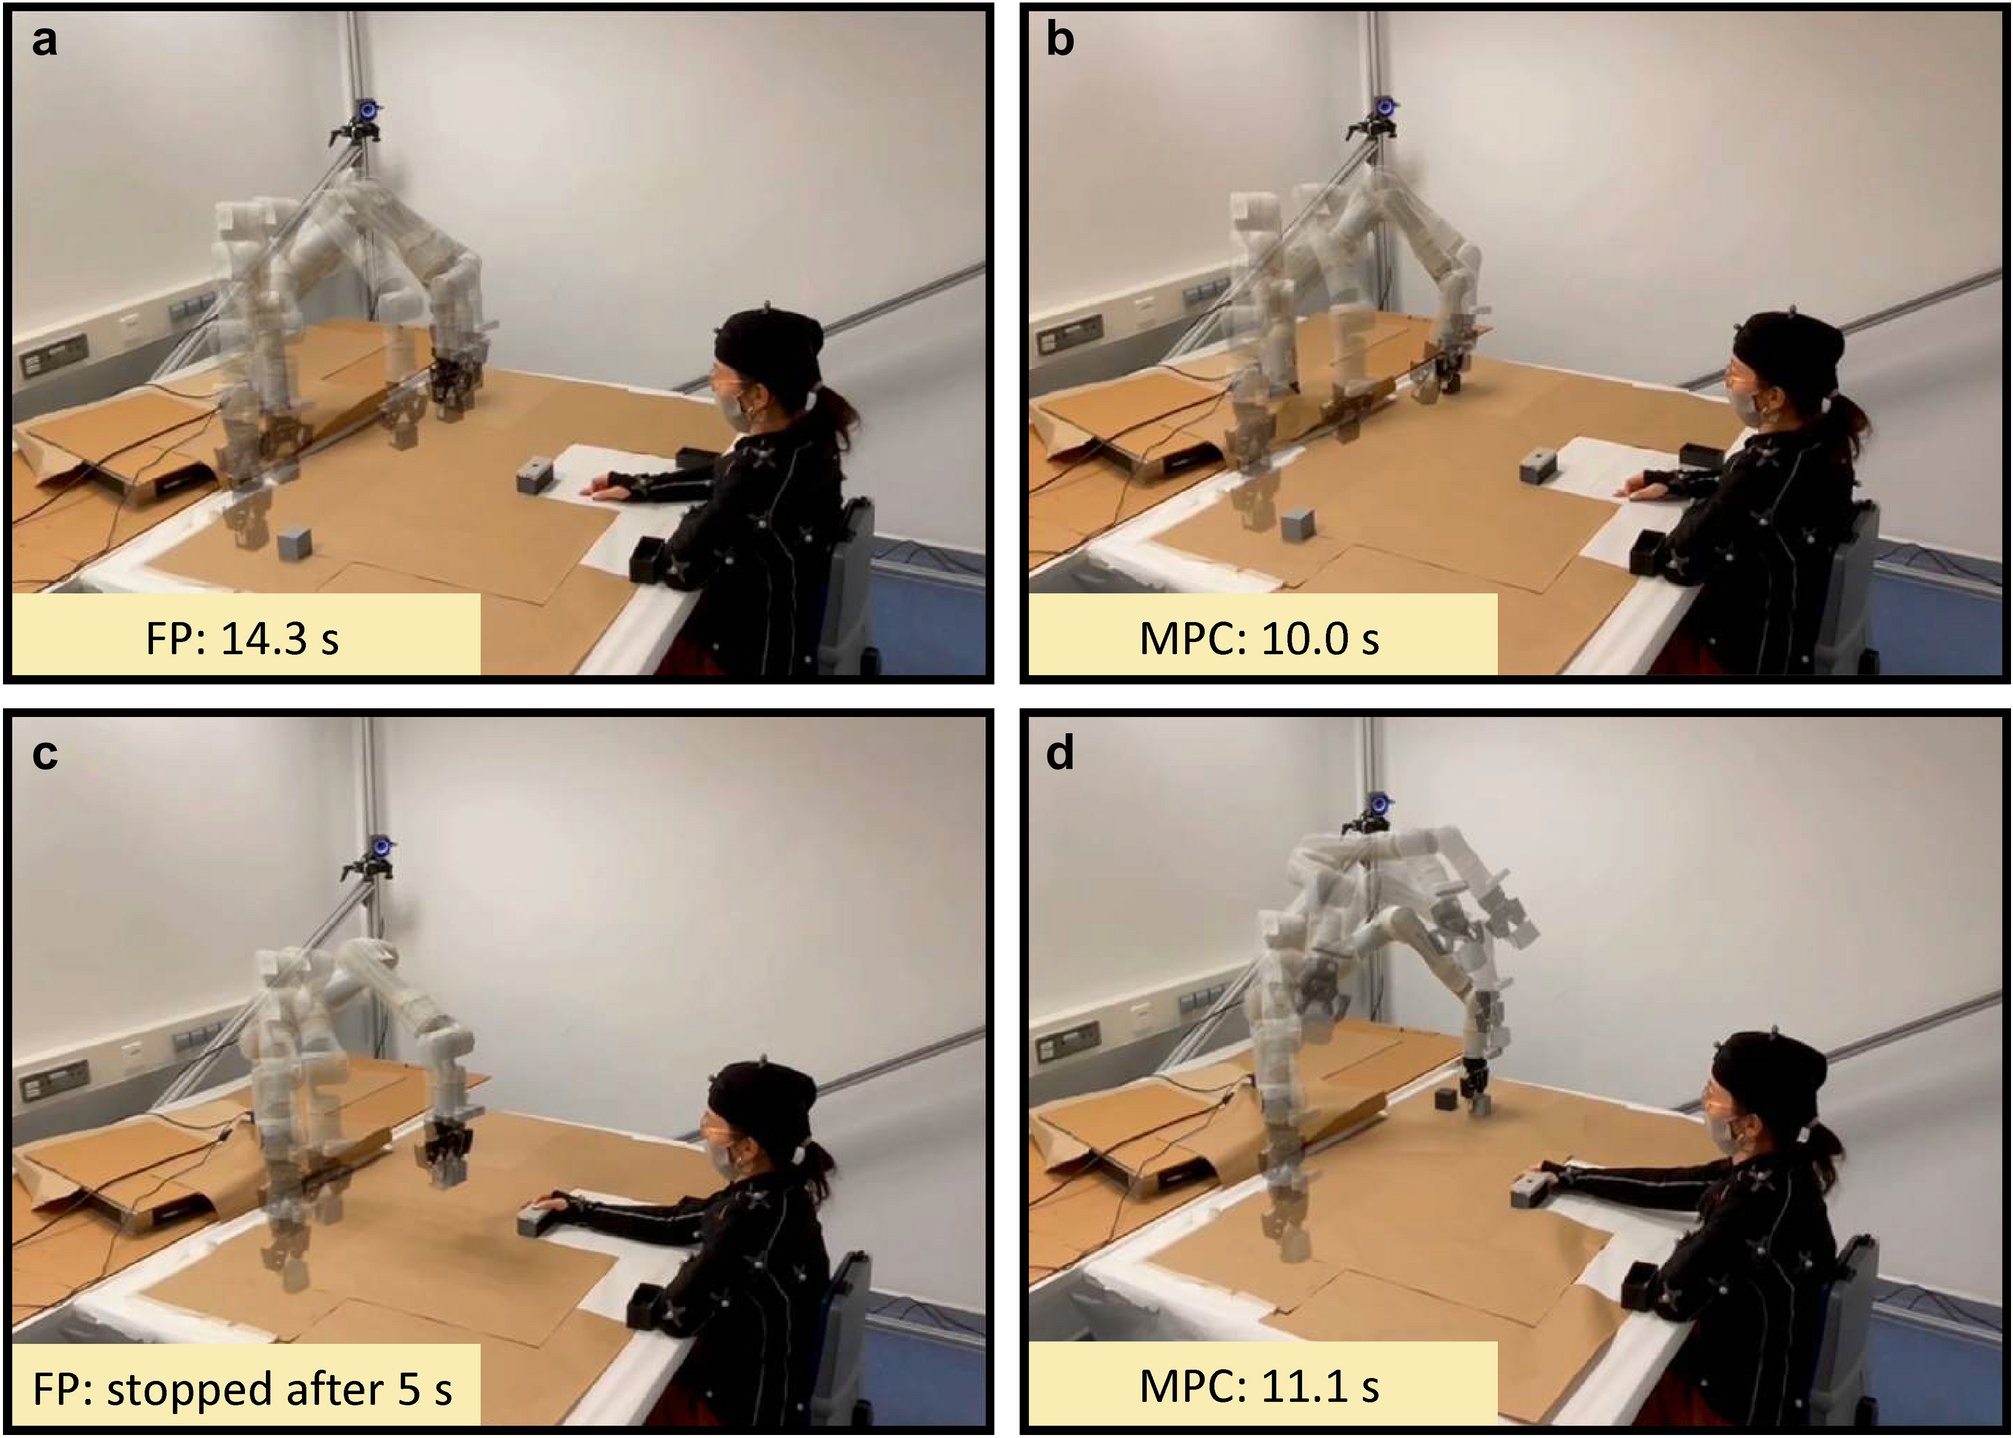 Perceived safety in human–cobot interaction for fixed-path and real-time  motion planning algorithms | Scientific Reports